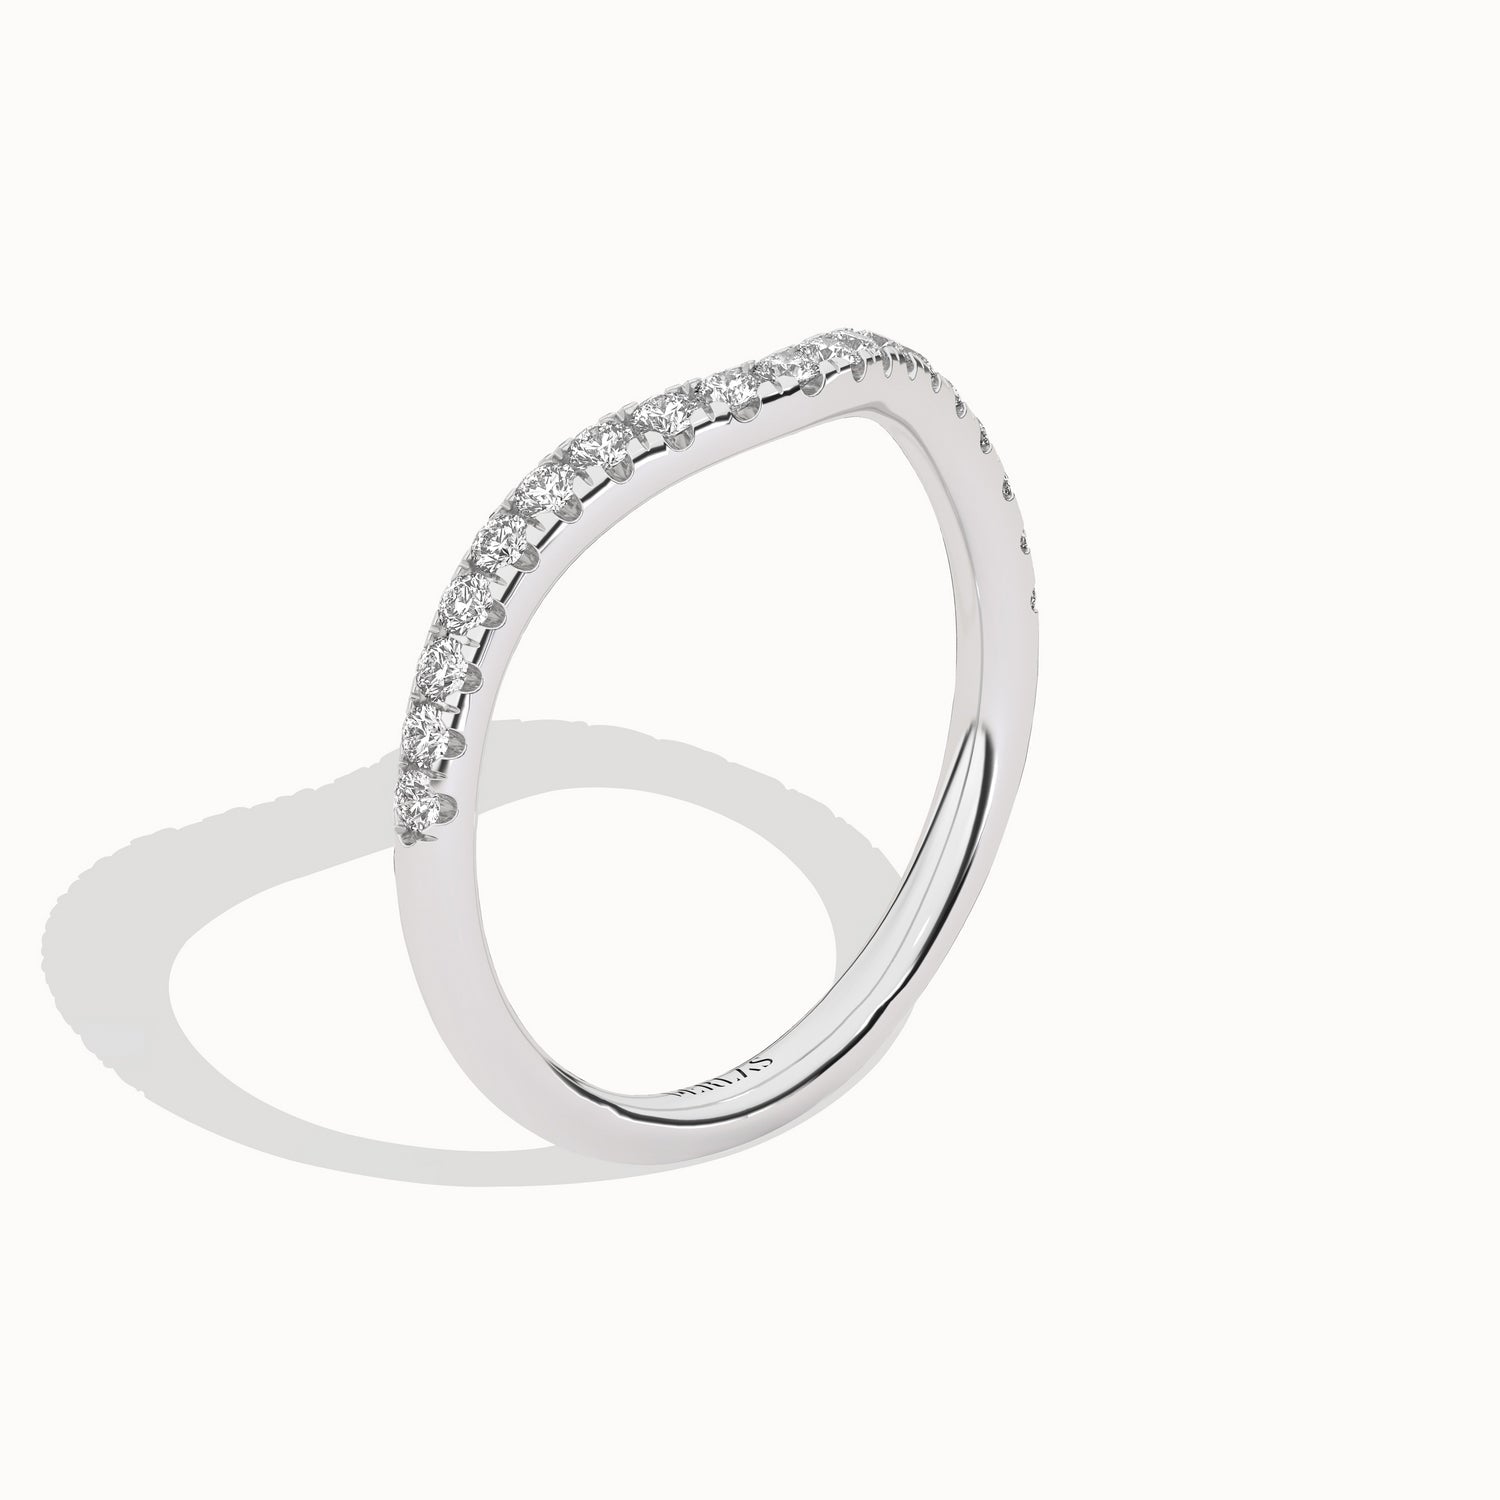 Rippling Round Ring_Product Angle_1/4Ct. - 2